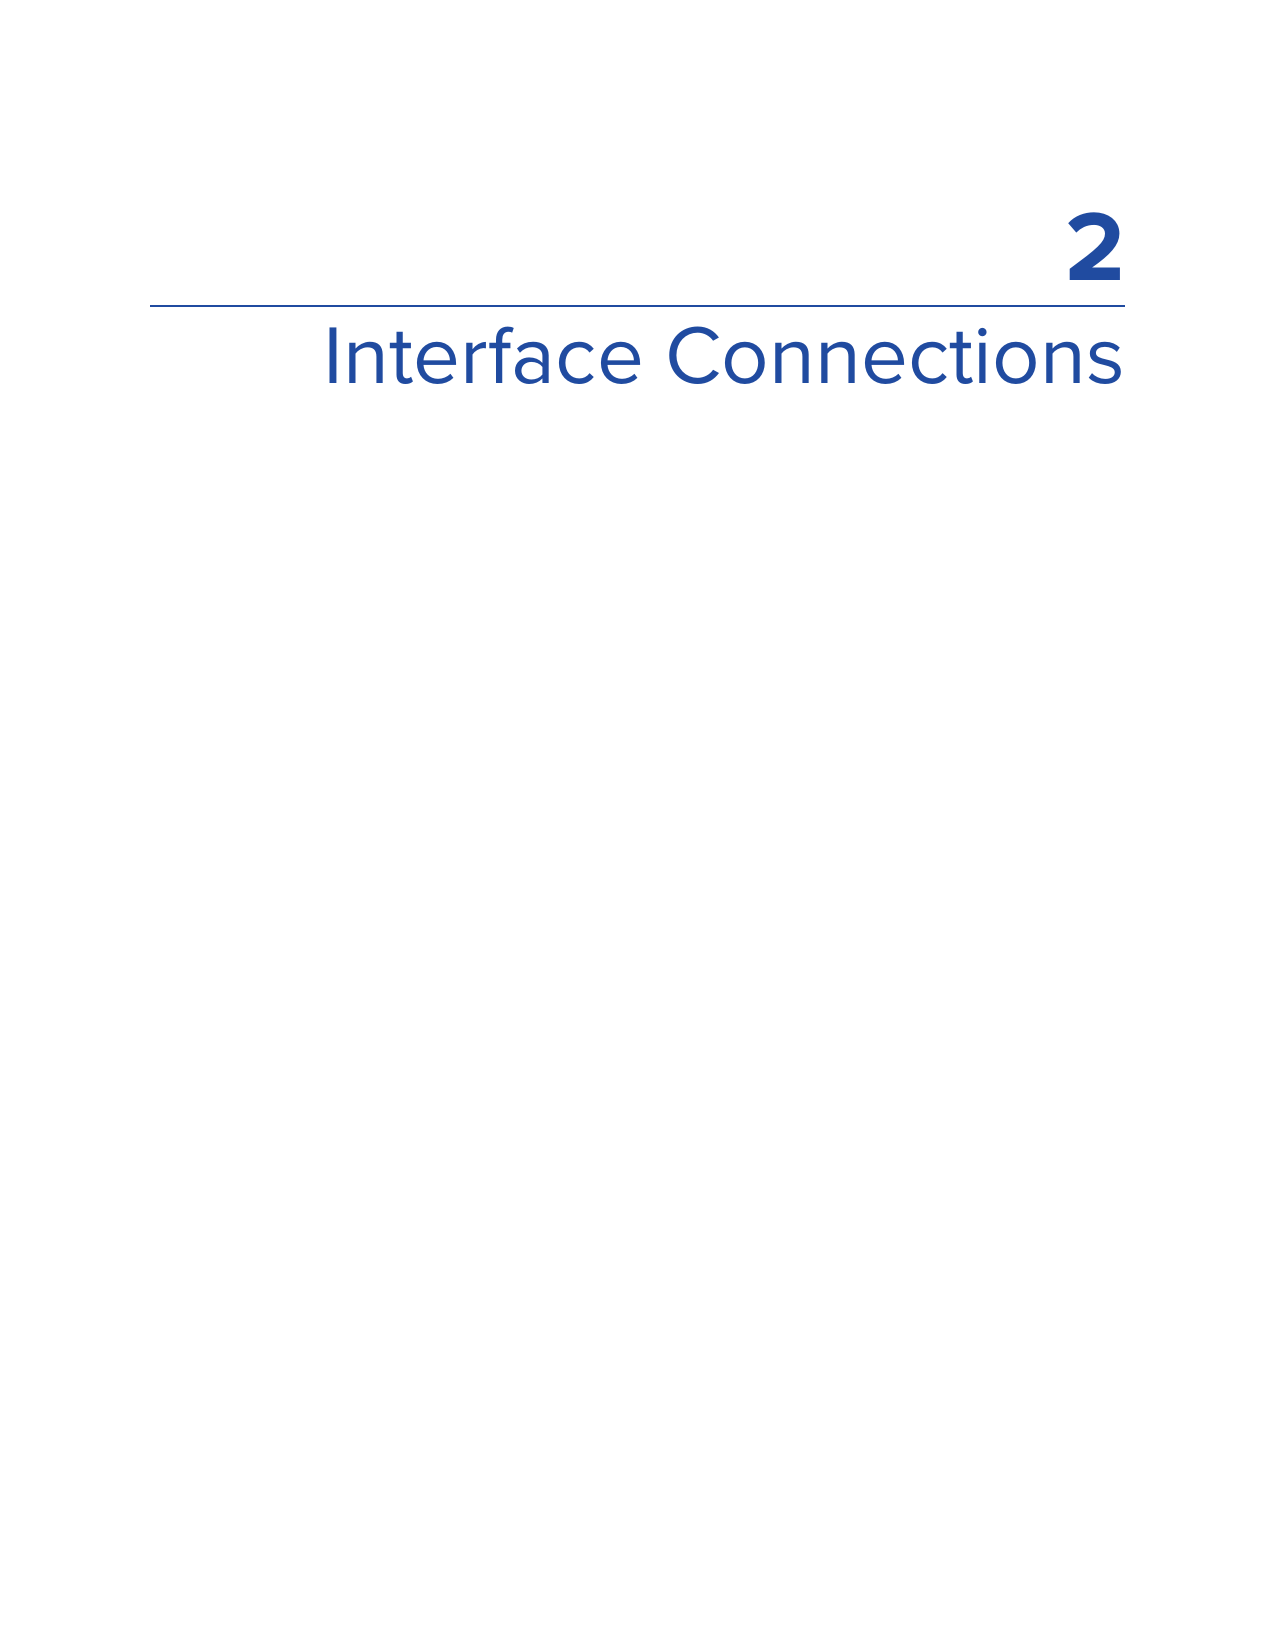 2Interface Connections